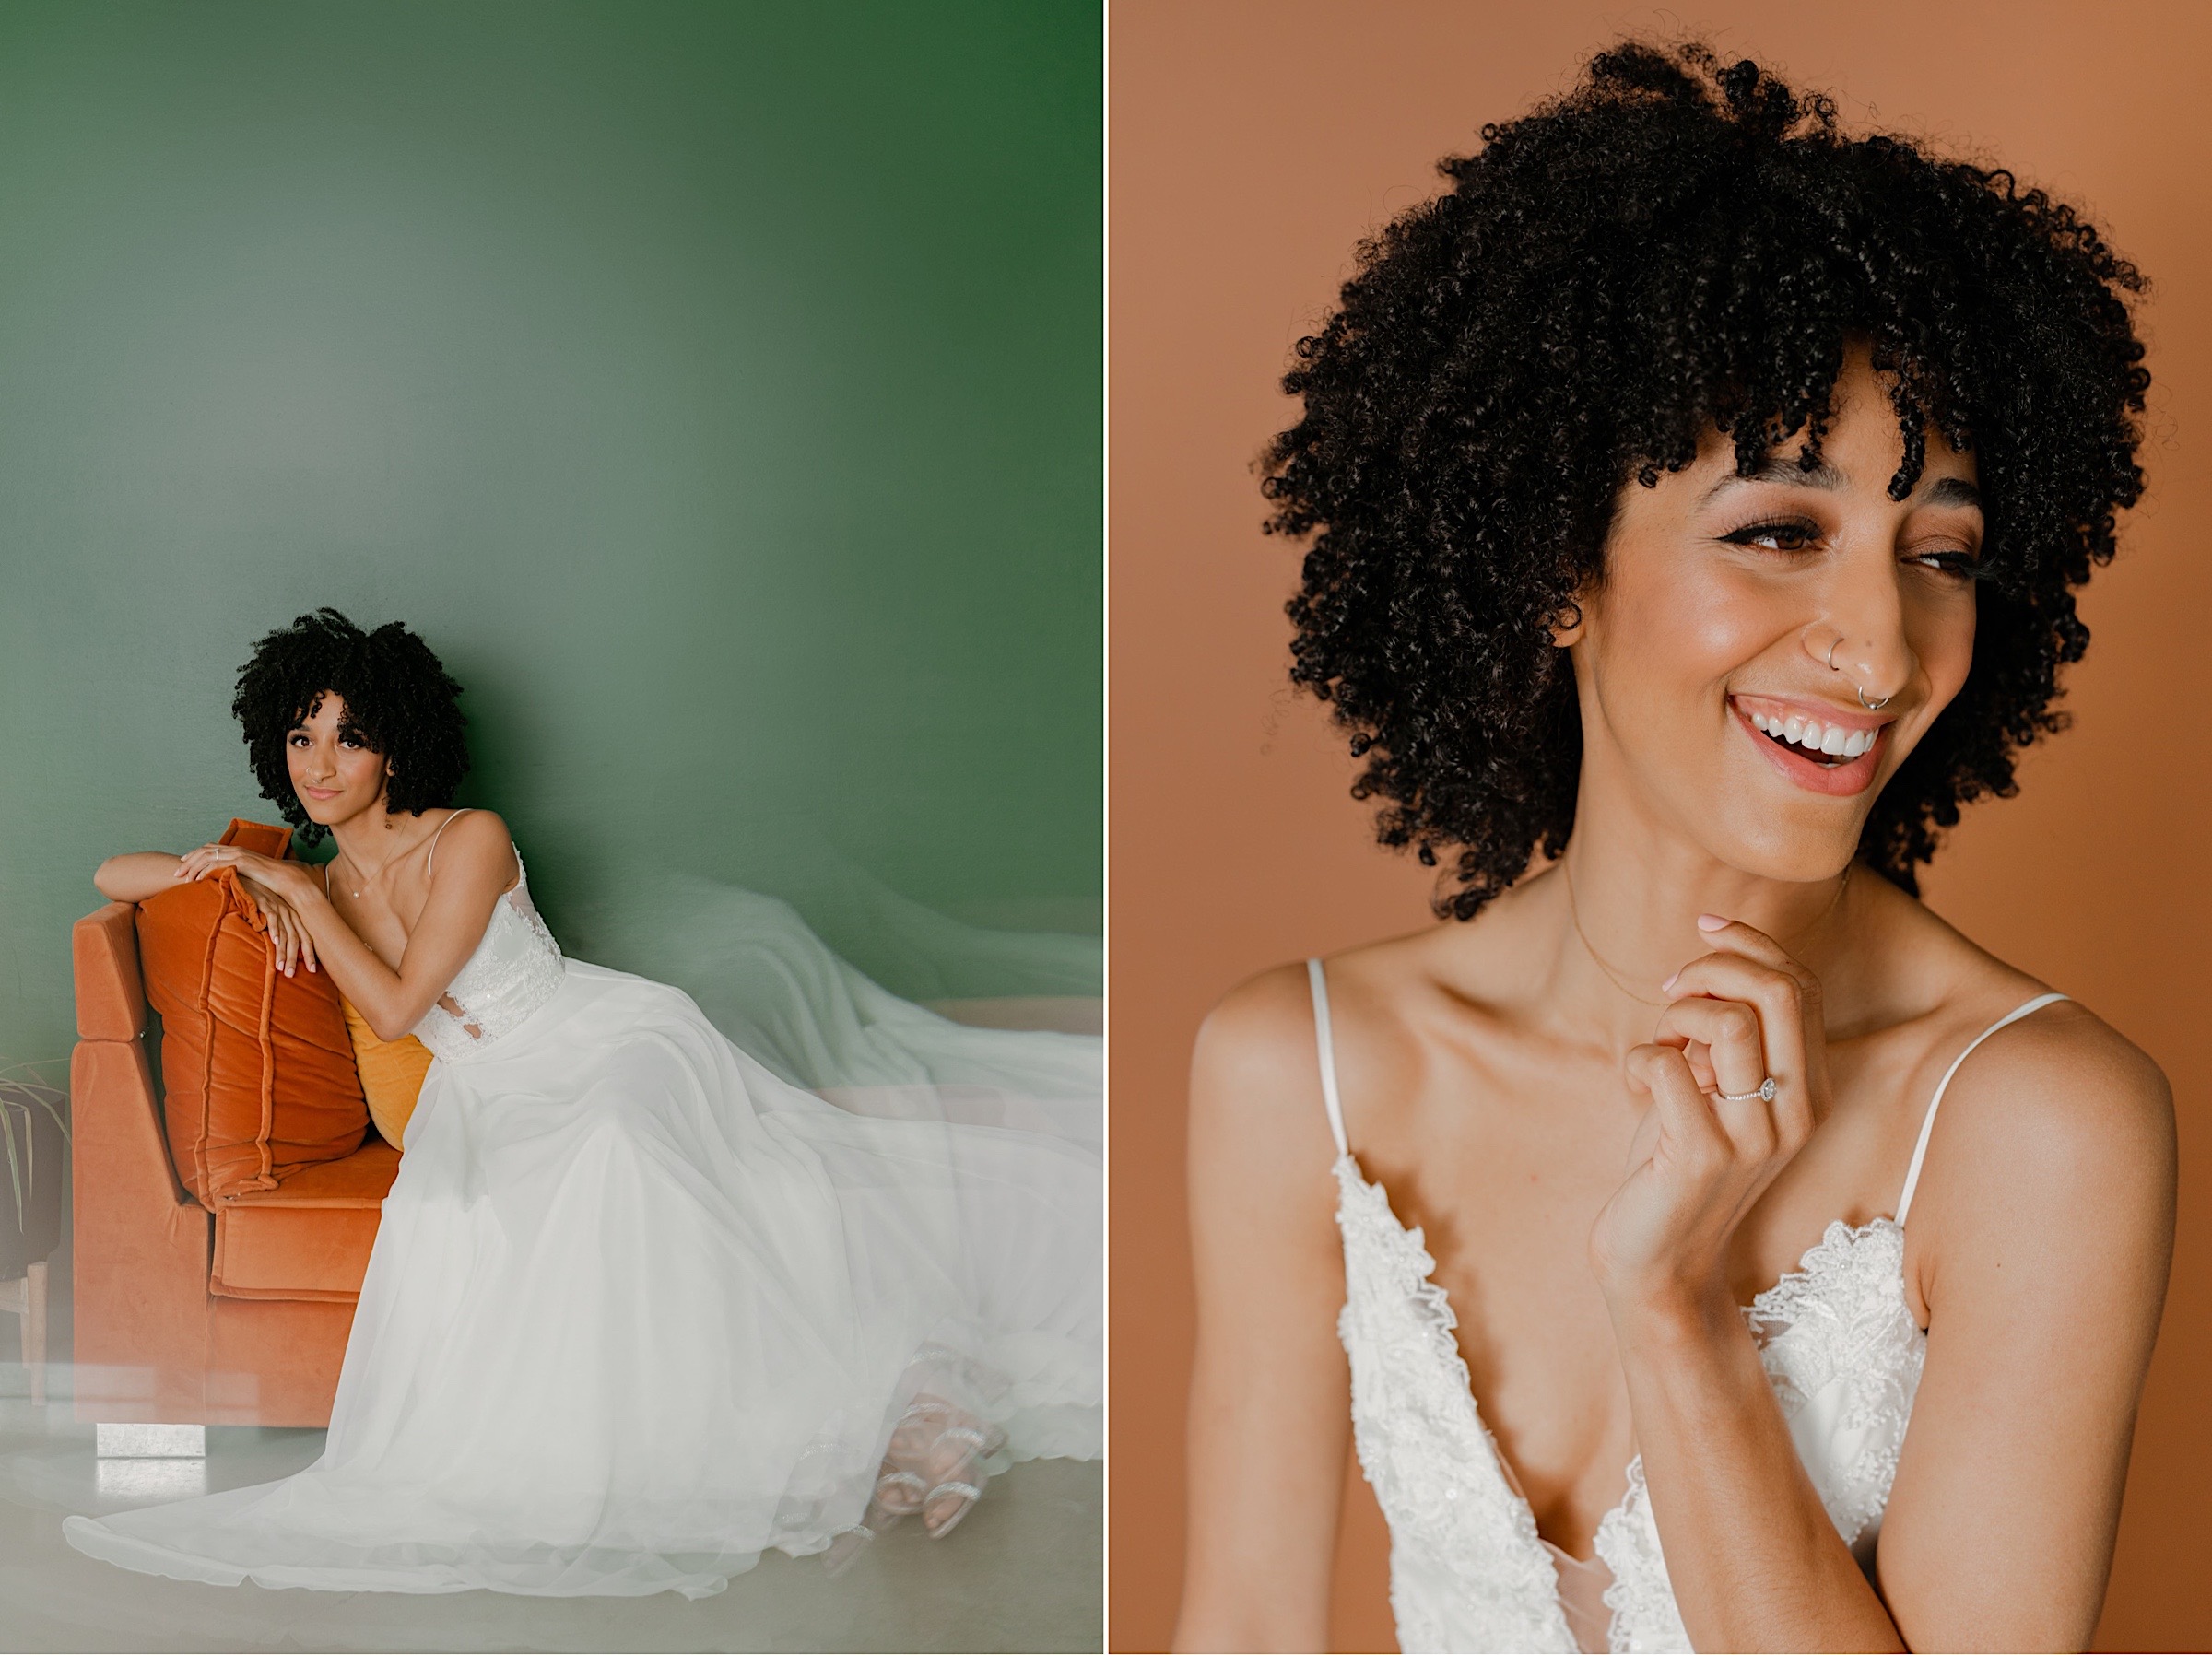 Minimalistic-studio-bridal-photos-session-evergreen-lavendar-white-wedding-gown-african-american-natural-afro-hair-seattle-photographer